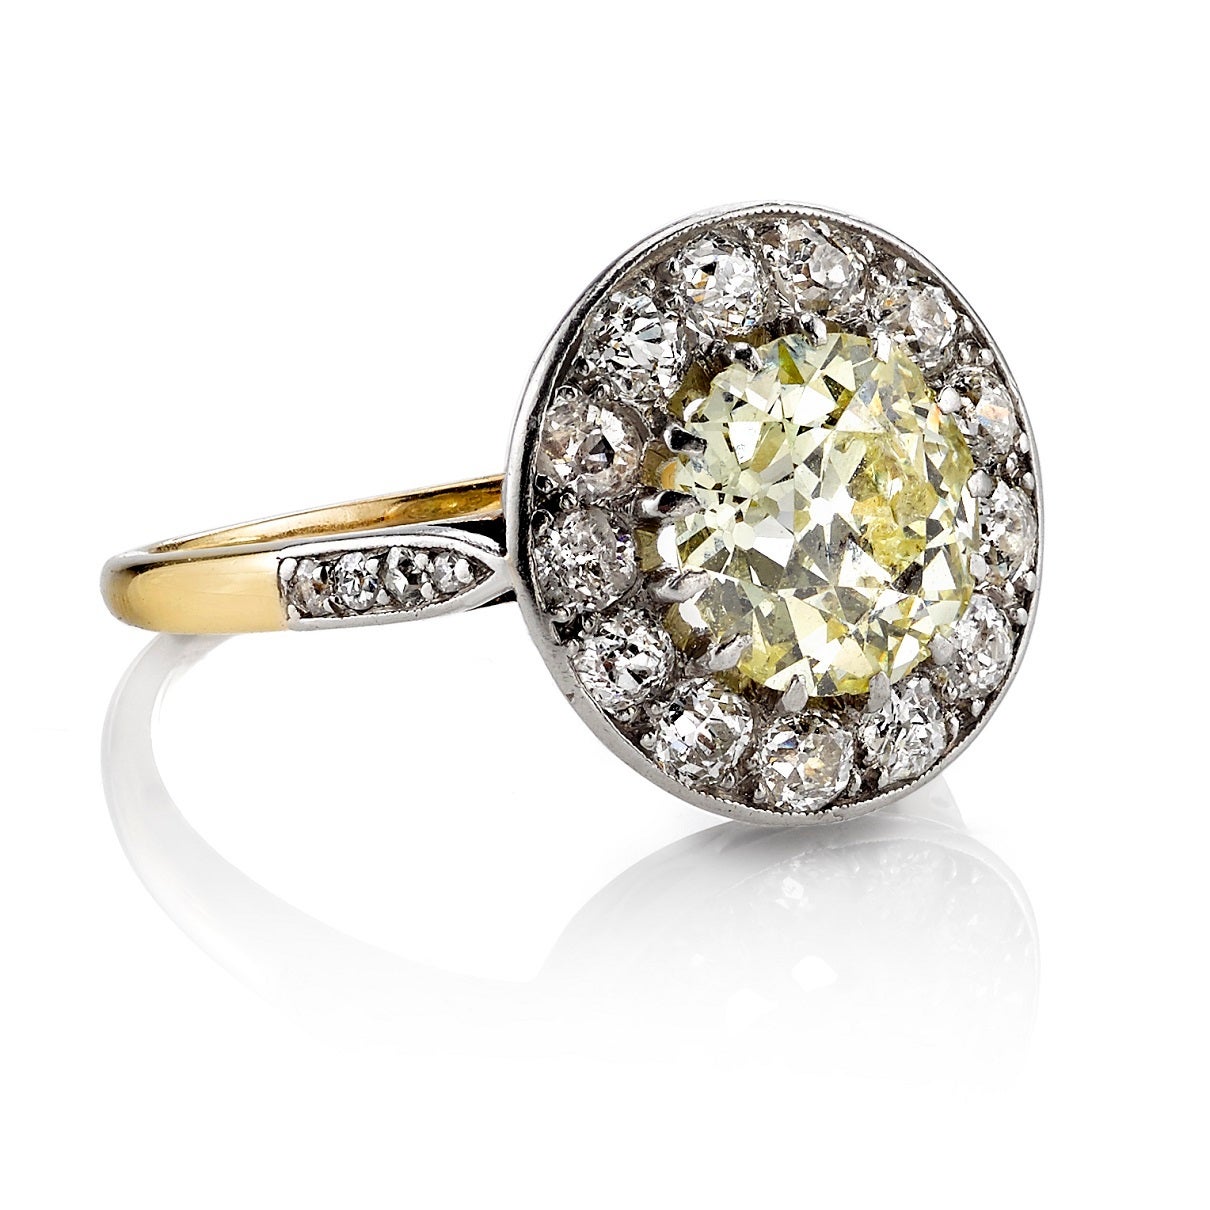 2.25ct Fancy Yellow/ SI2 old European cut diamond set in an 18K yellow gold and platinum mounting. Circa 1930.